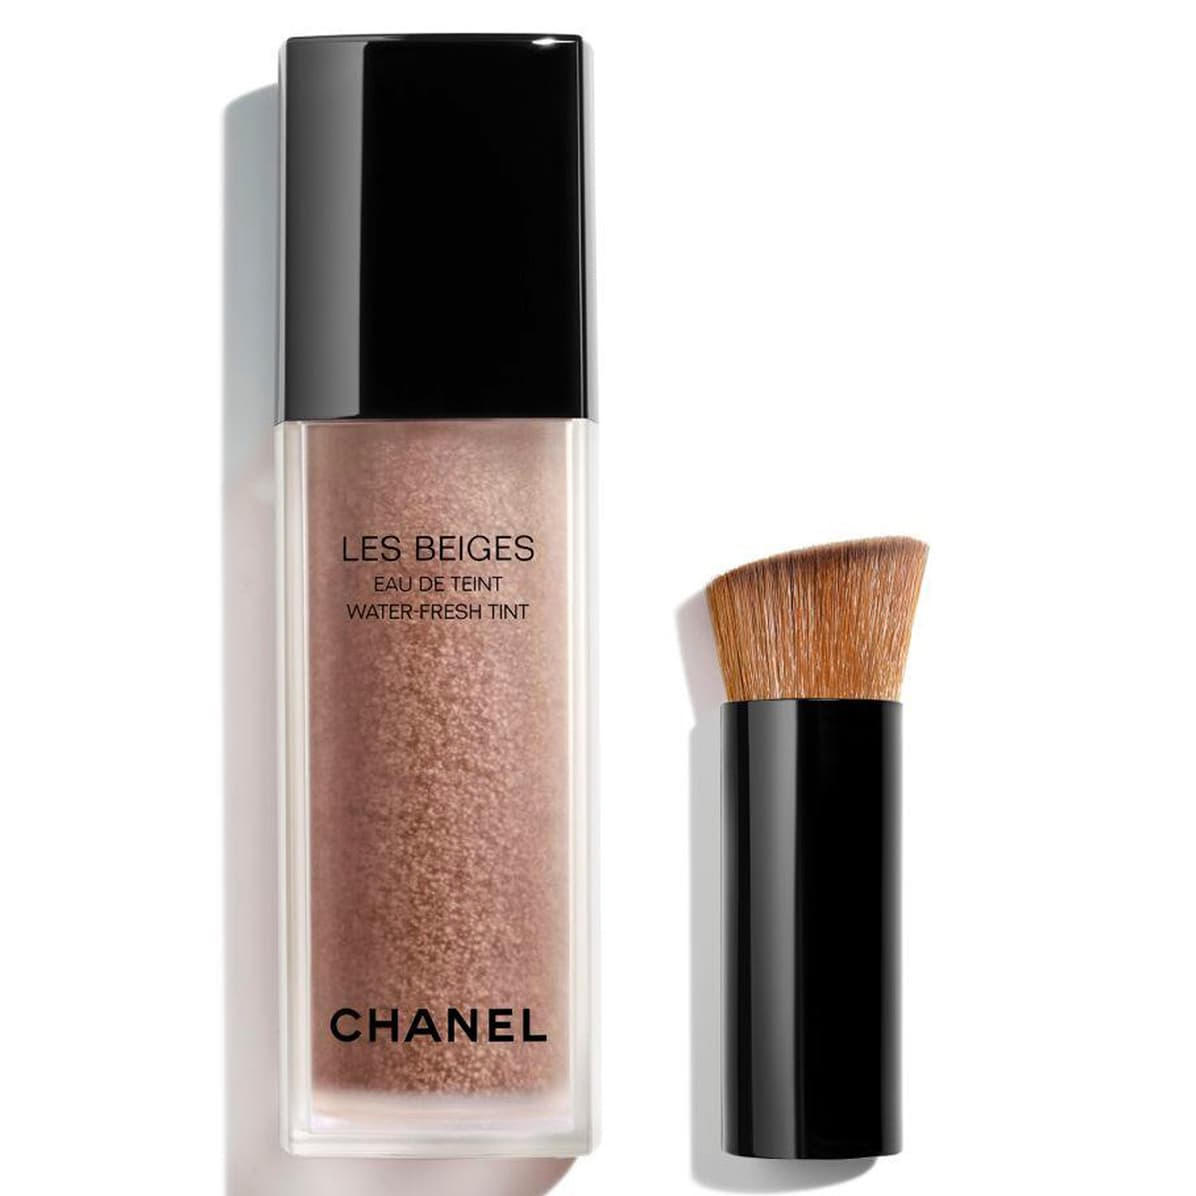 Chanel Les Beiges Water-Fresh Tint Deep